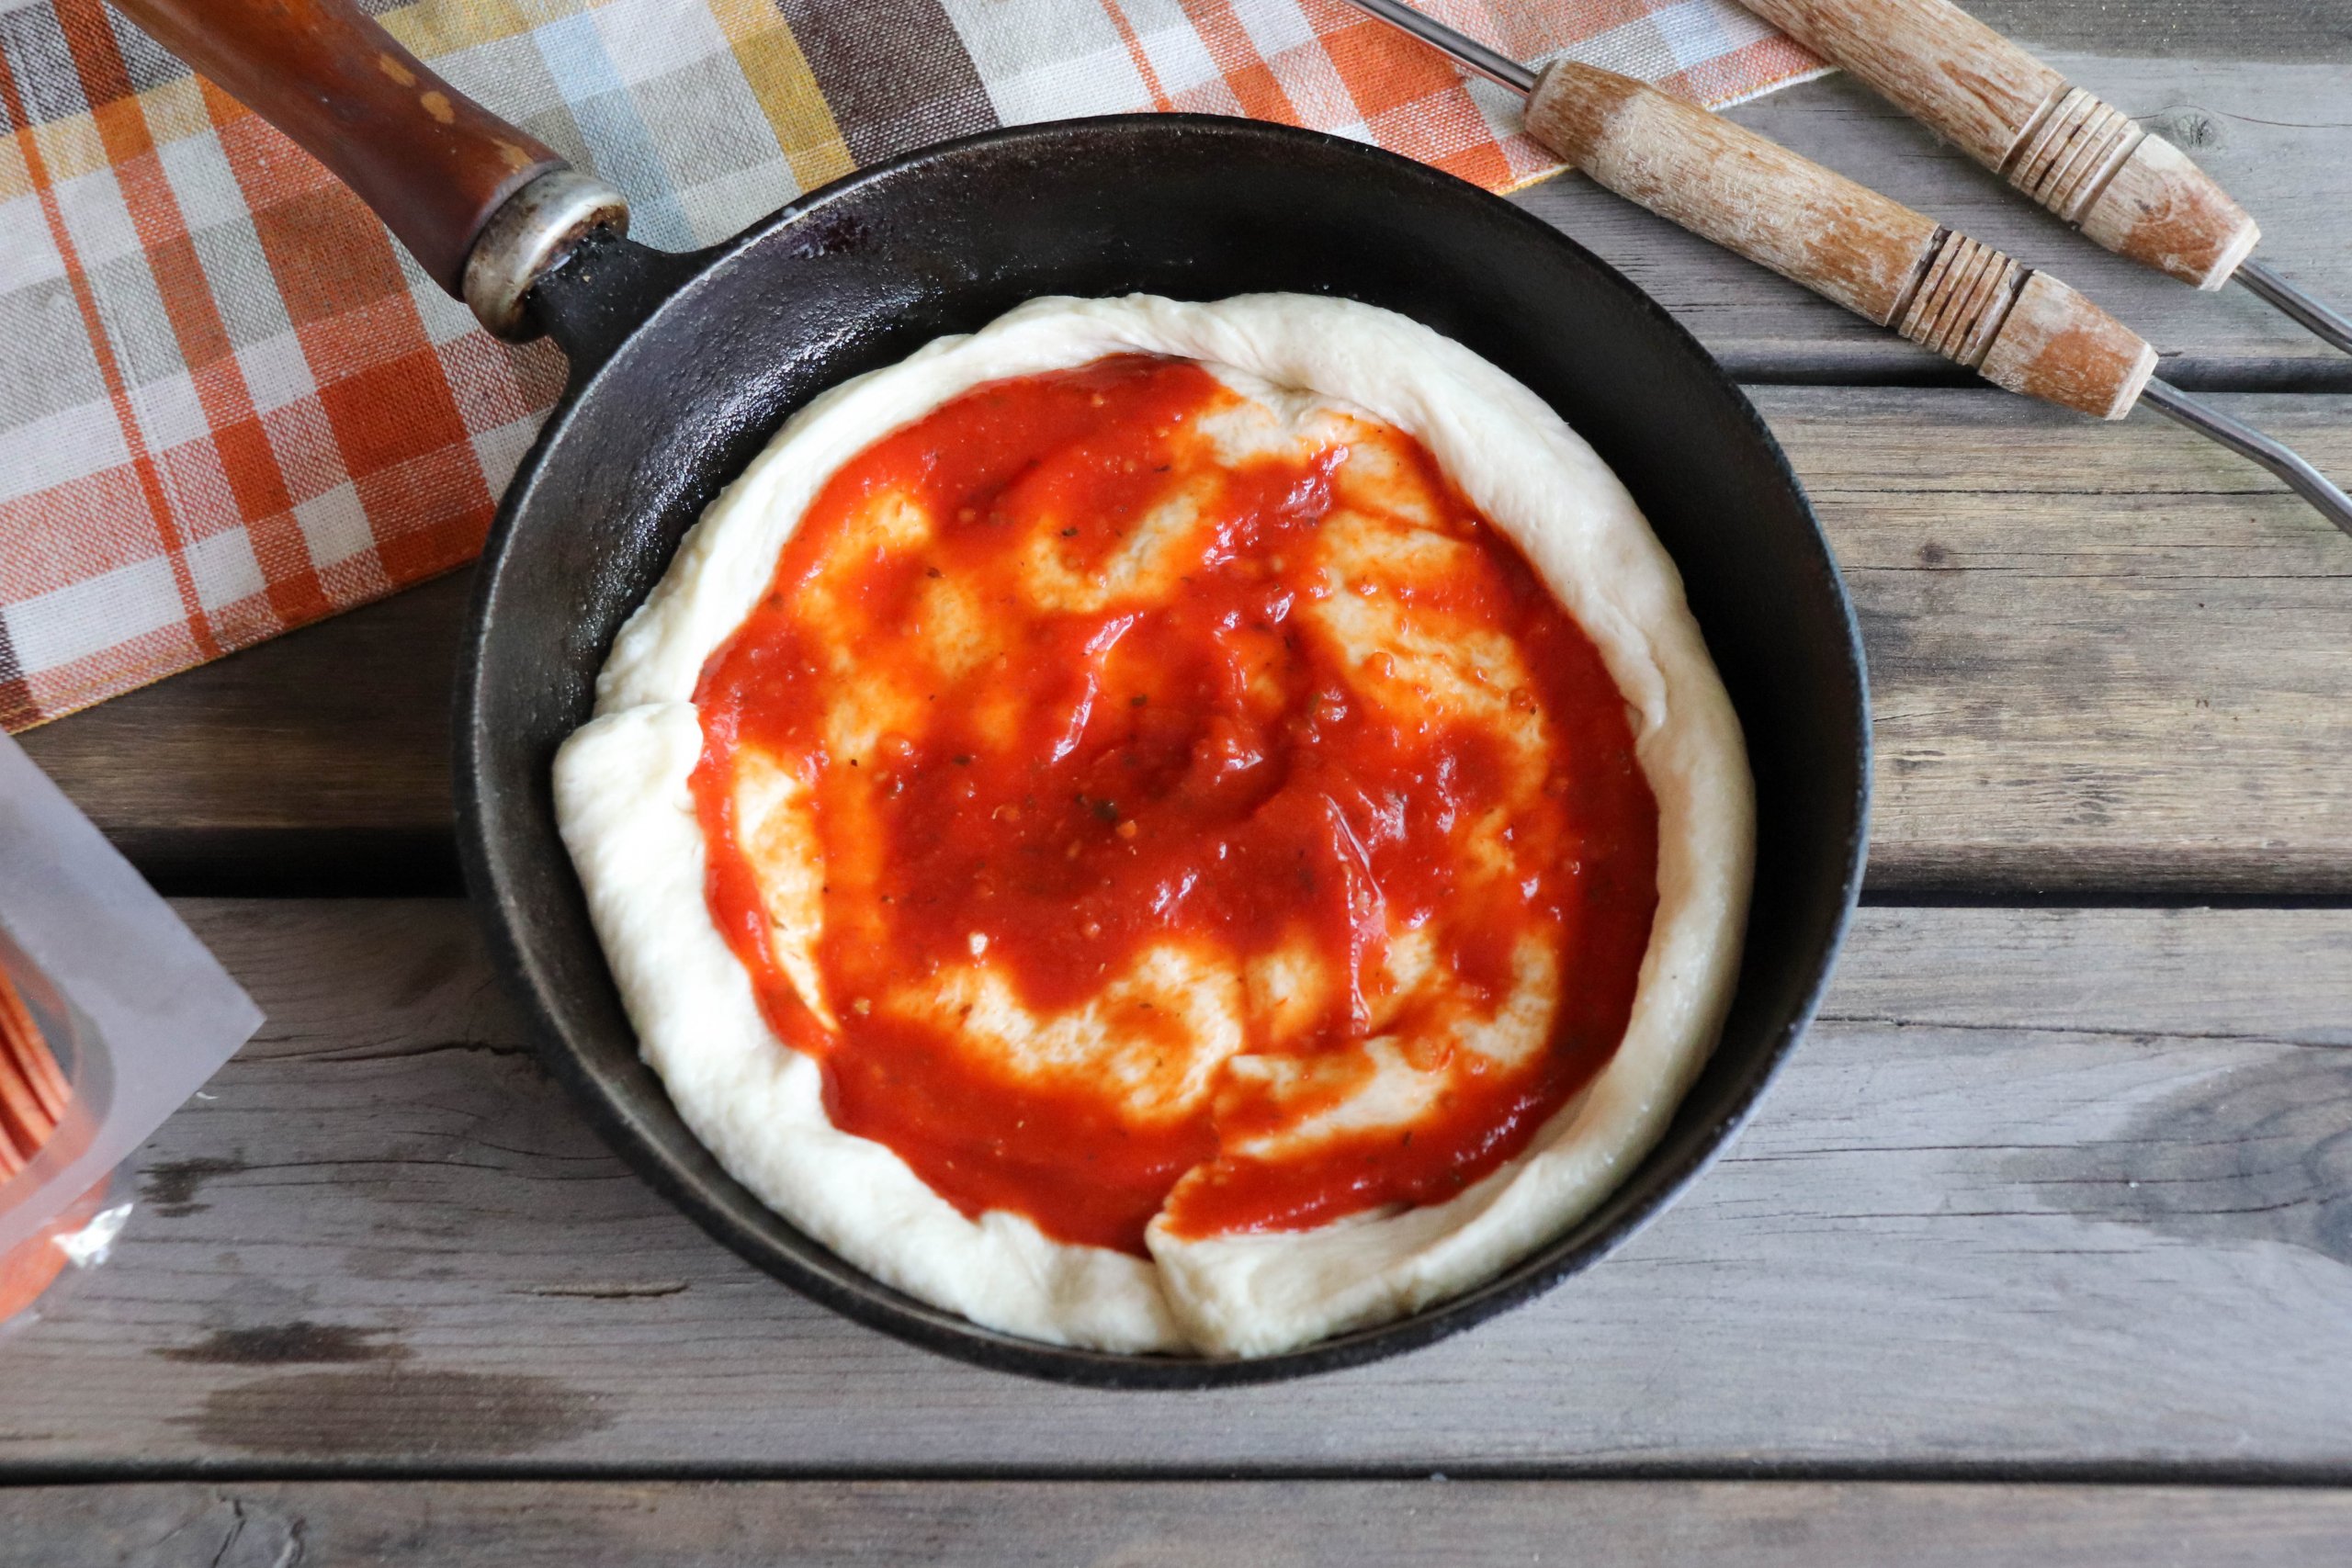 Pizza dough spread onto a cast iron skillet with tomato sauce on a wooden picnic table.